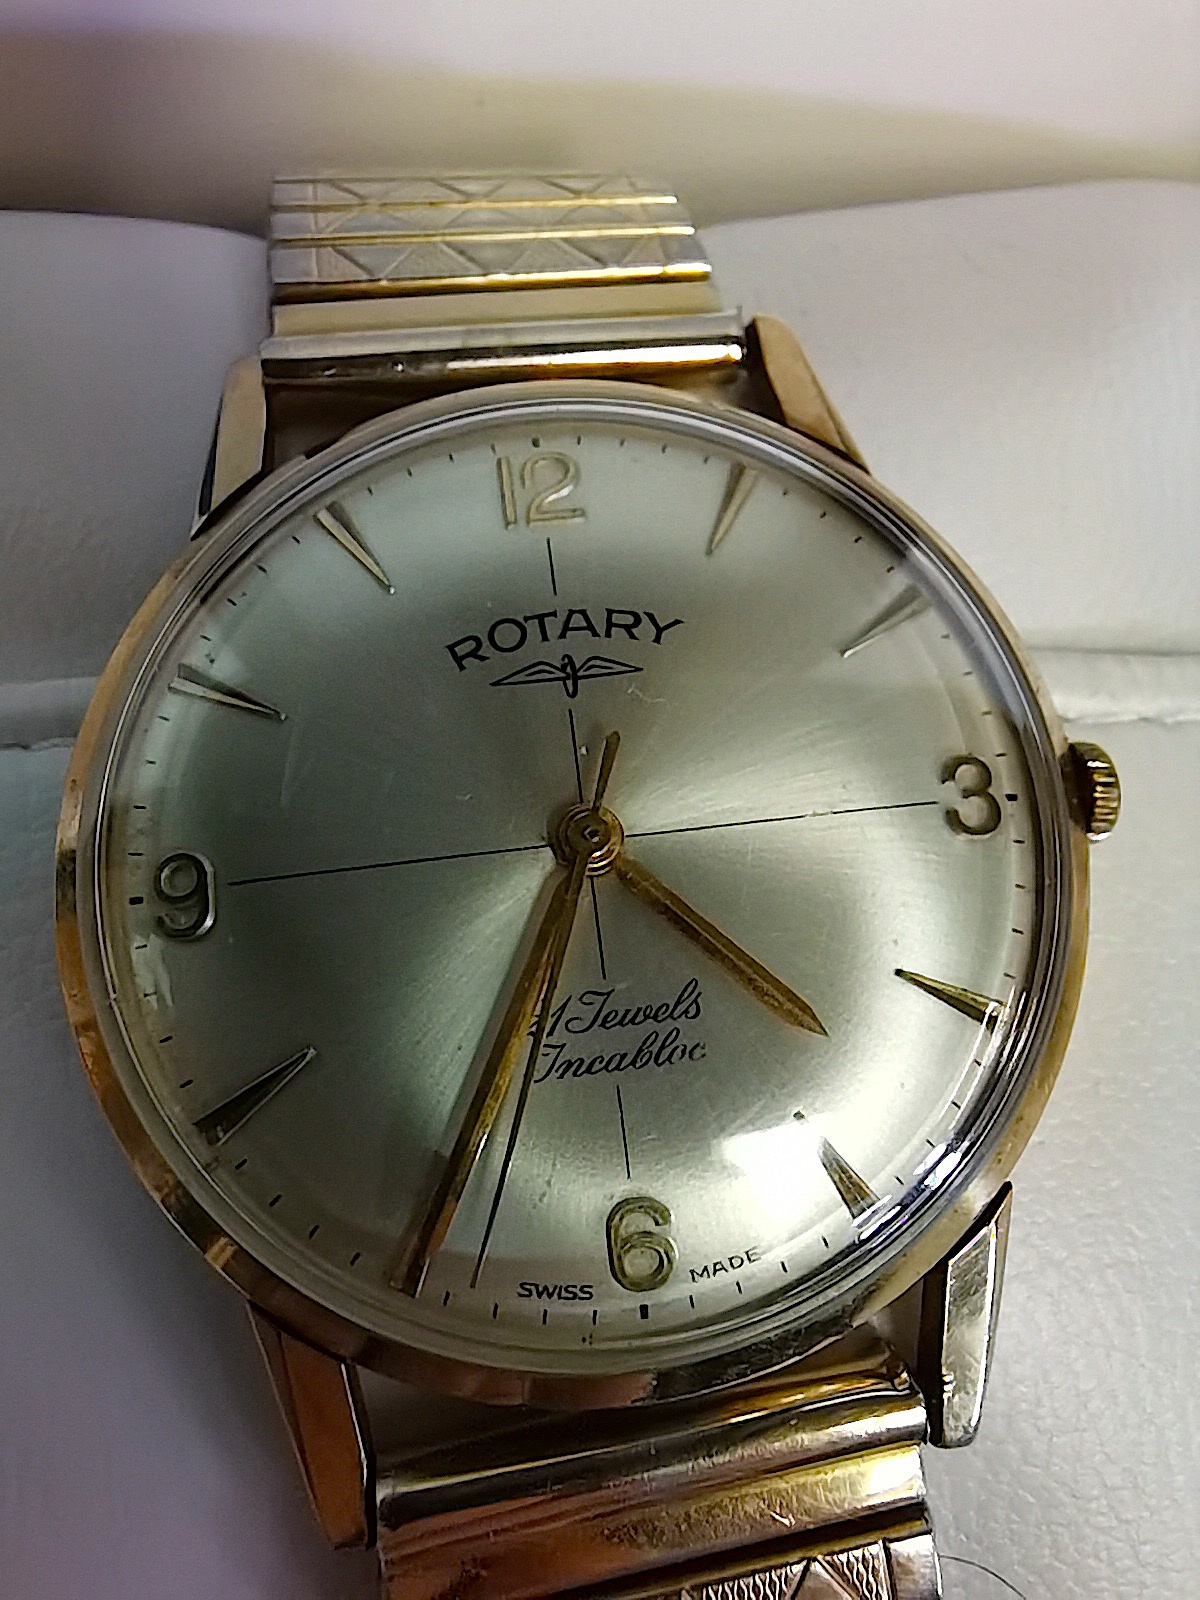 5 Watches Rotary Gents watch with expandable strap ltd edition and Rotary Gents watch - Image 2 of 3